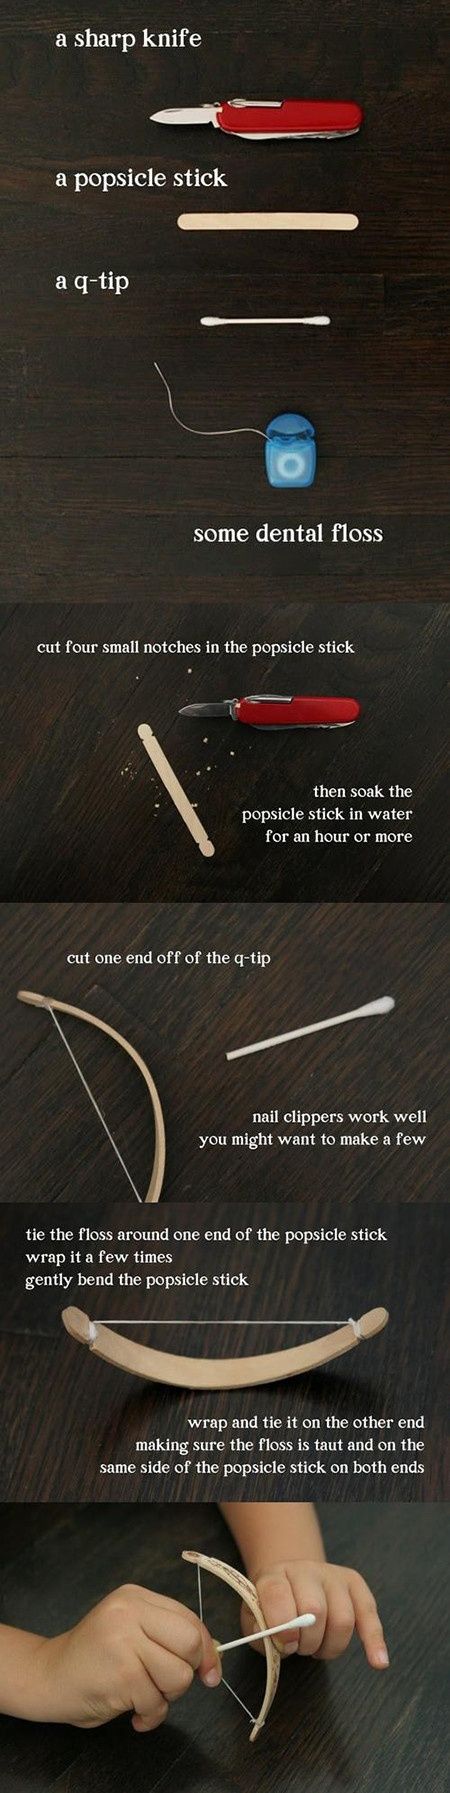 How to make a mini bow and arrow with everyday things. THIS WILL HAPPEN.